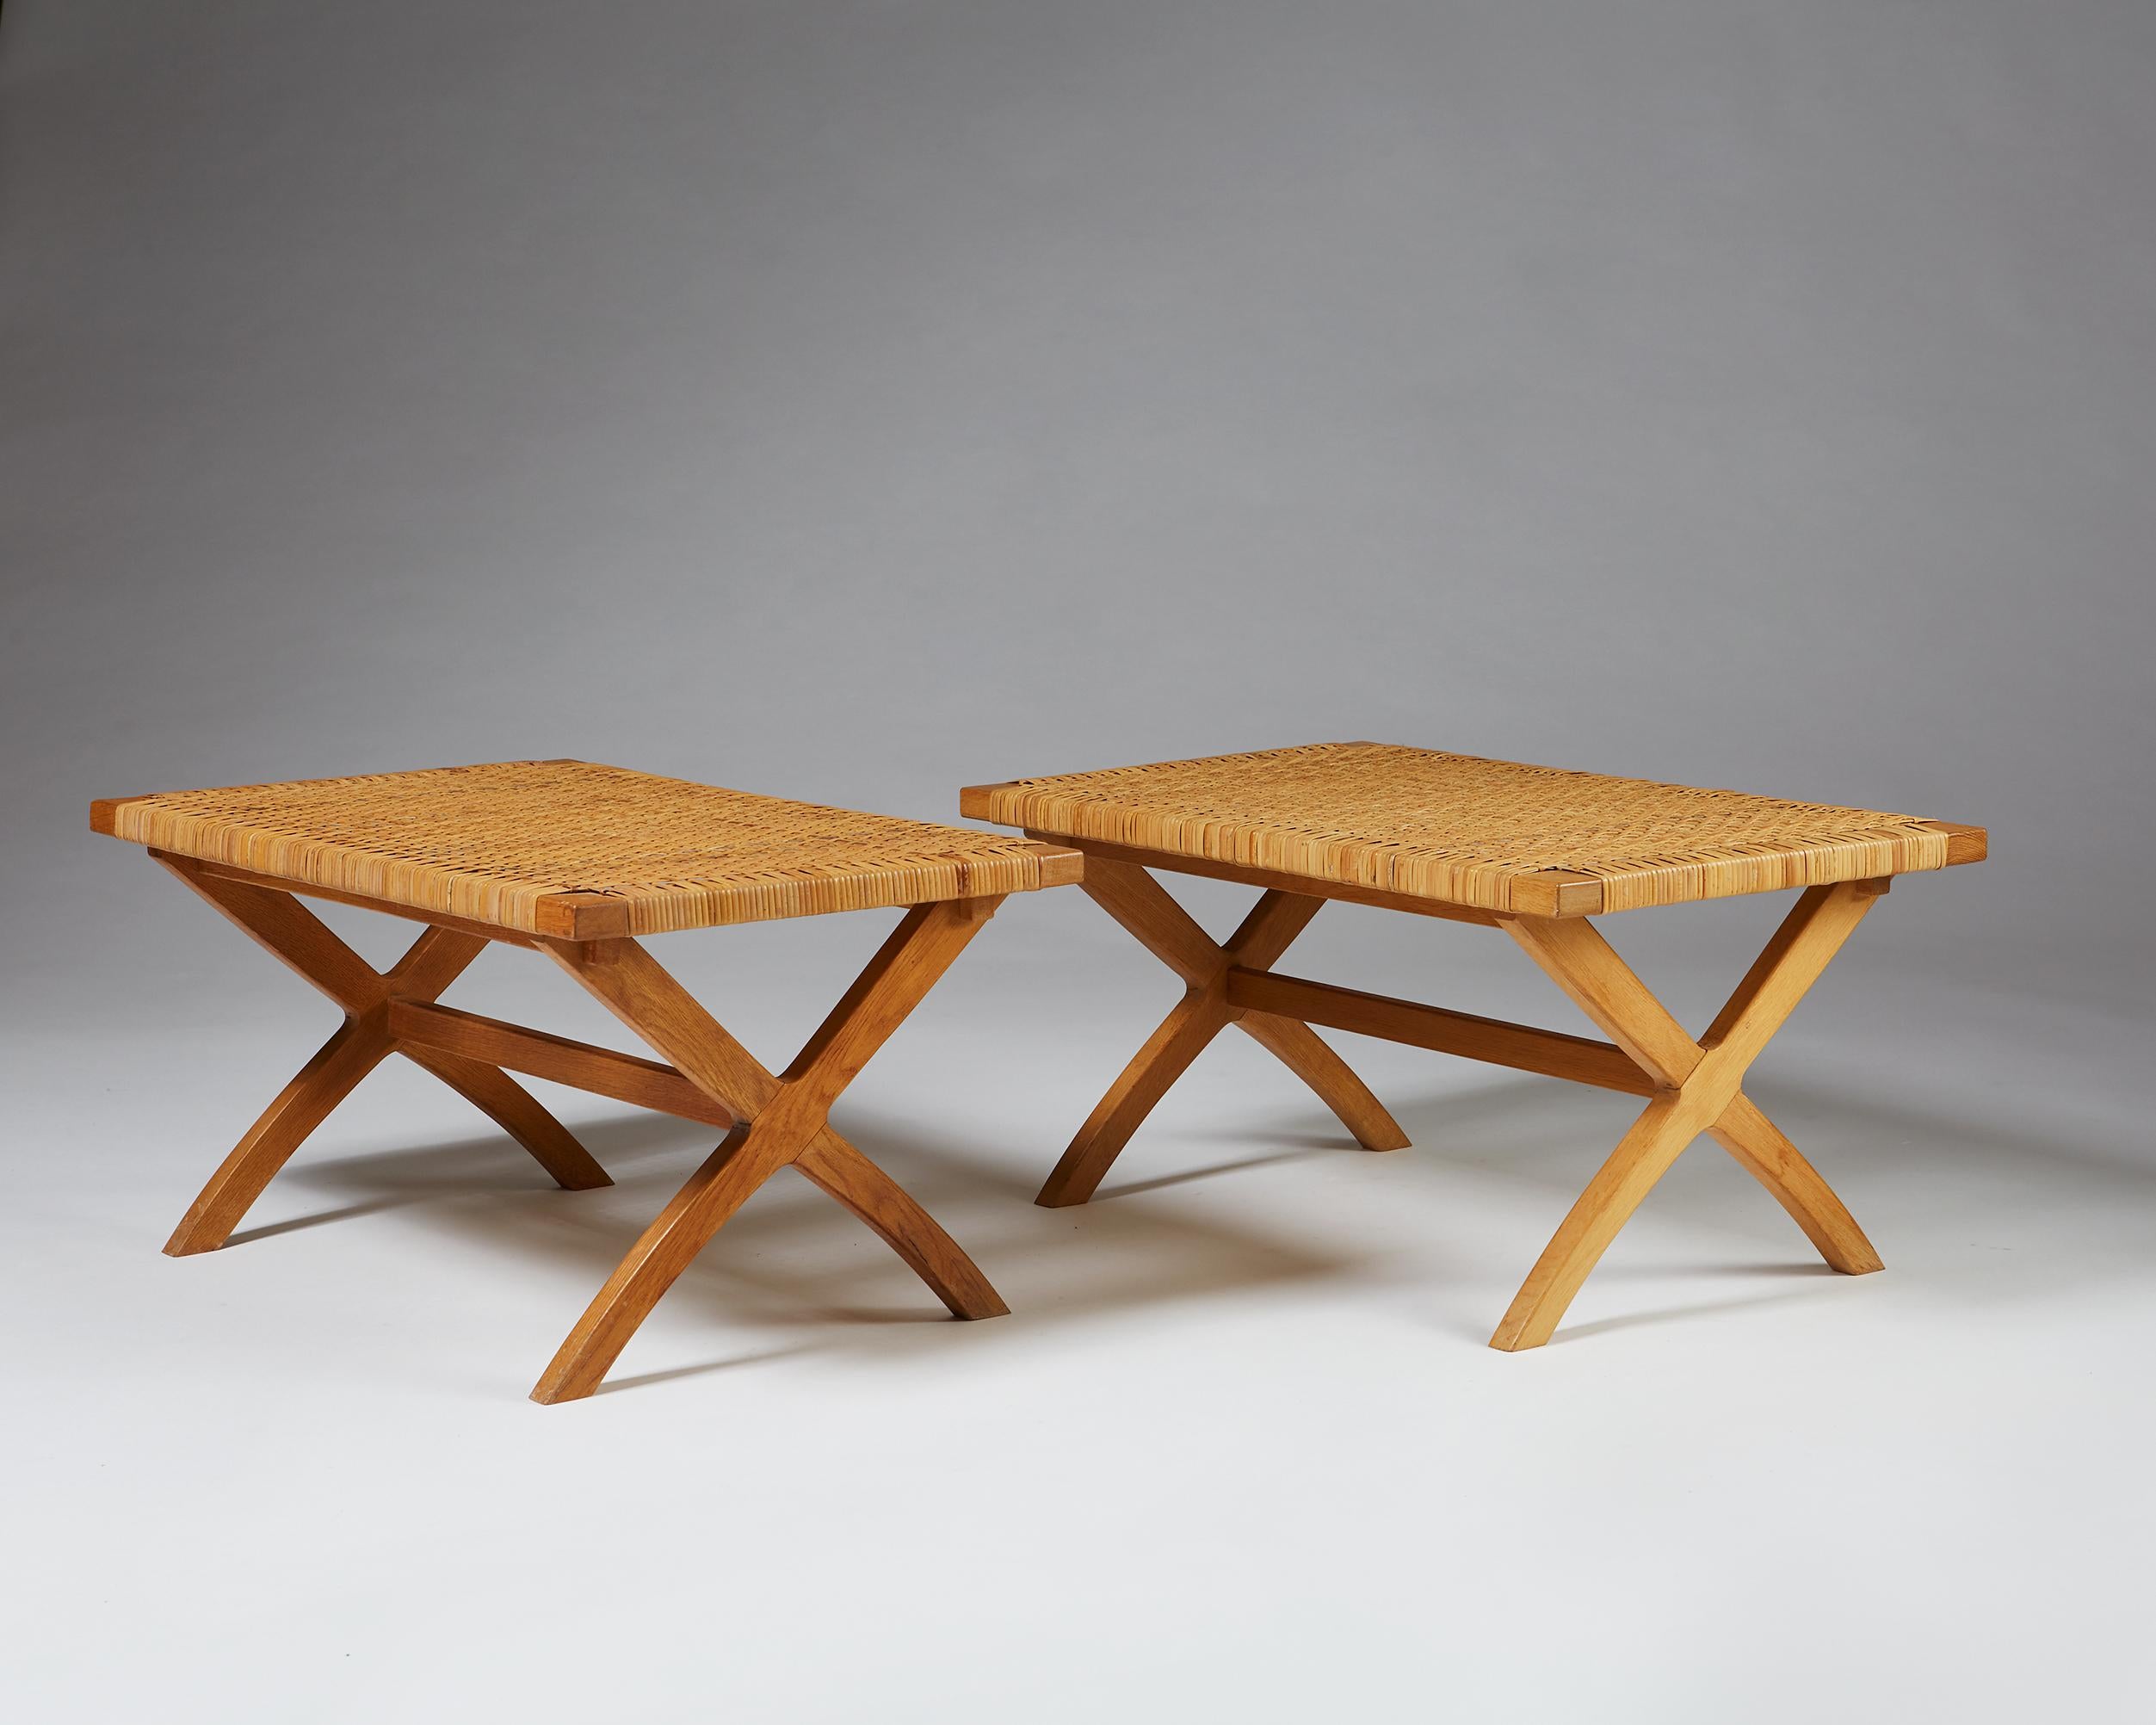 Scandinavian Modern Set of Two Benches, Anonymous, Denmark. 1950s